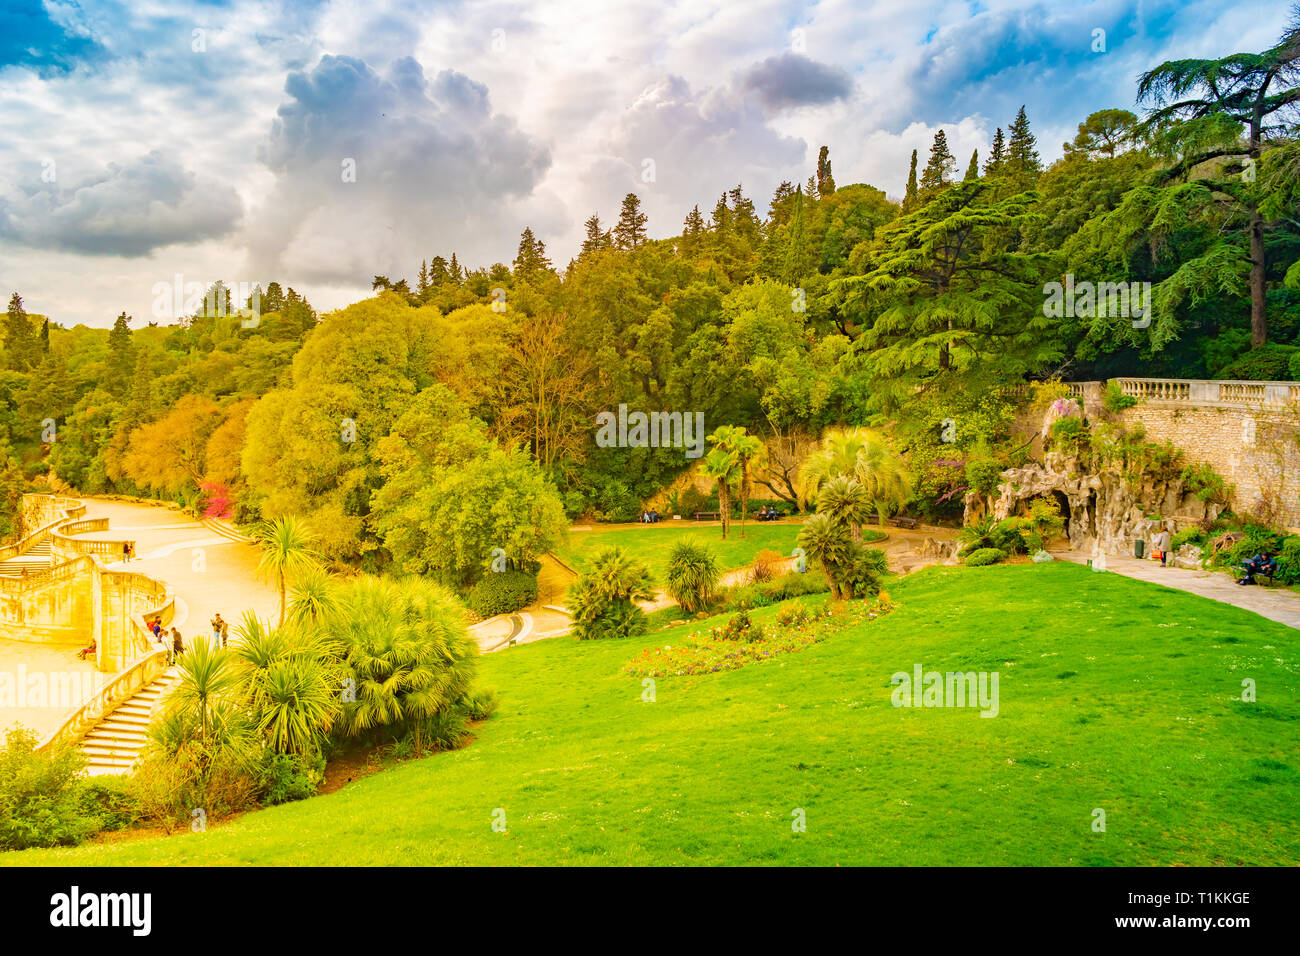 Aerial view of Jardin de la fontaine park and avenue Jean Jaures in Nimes France Stock Photo